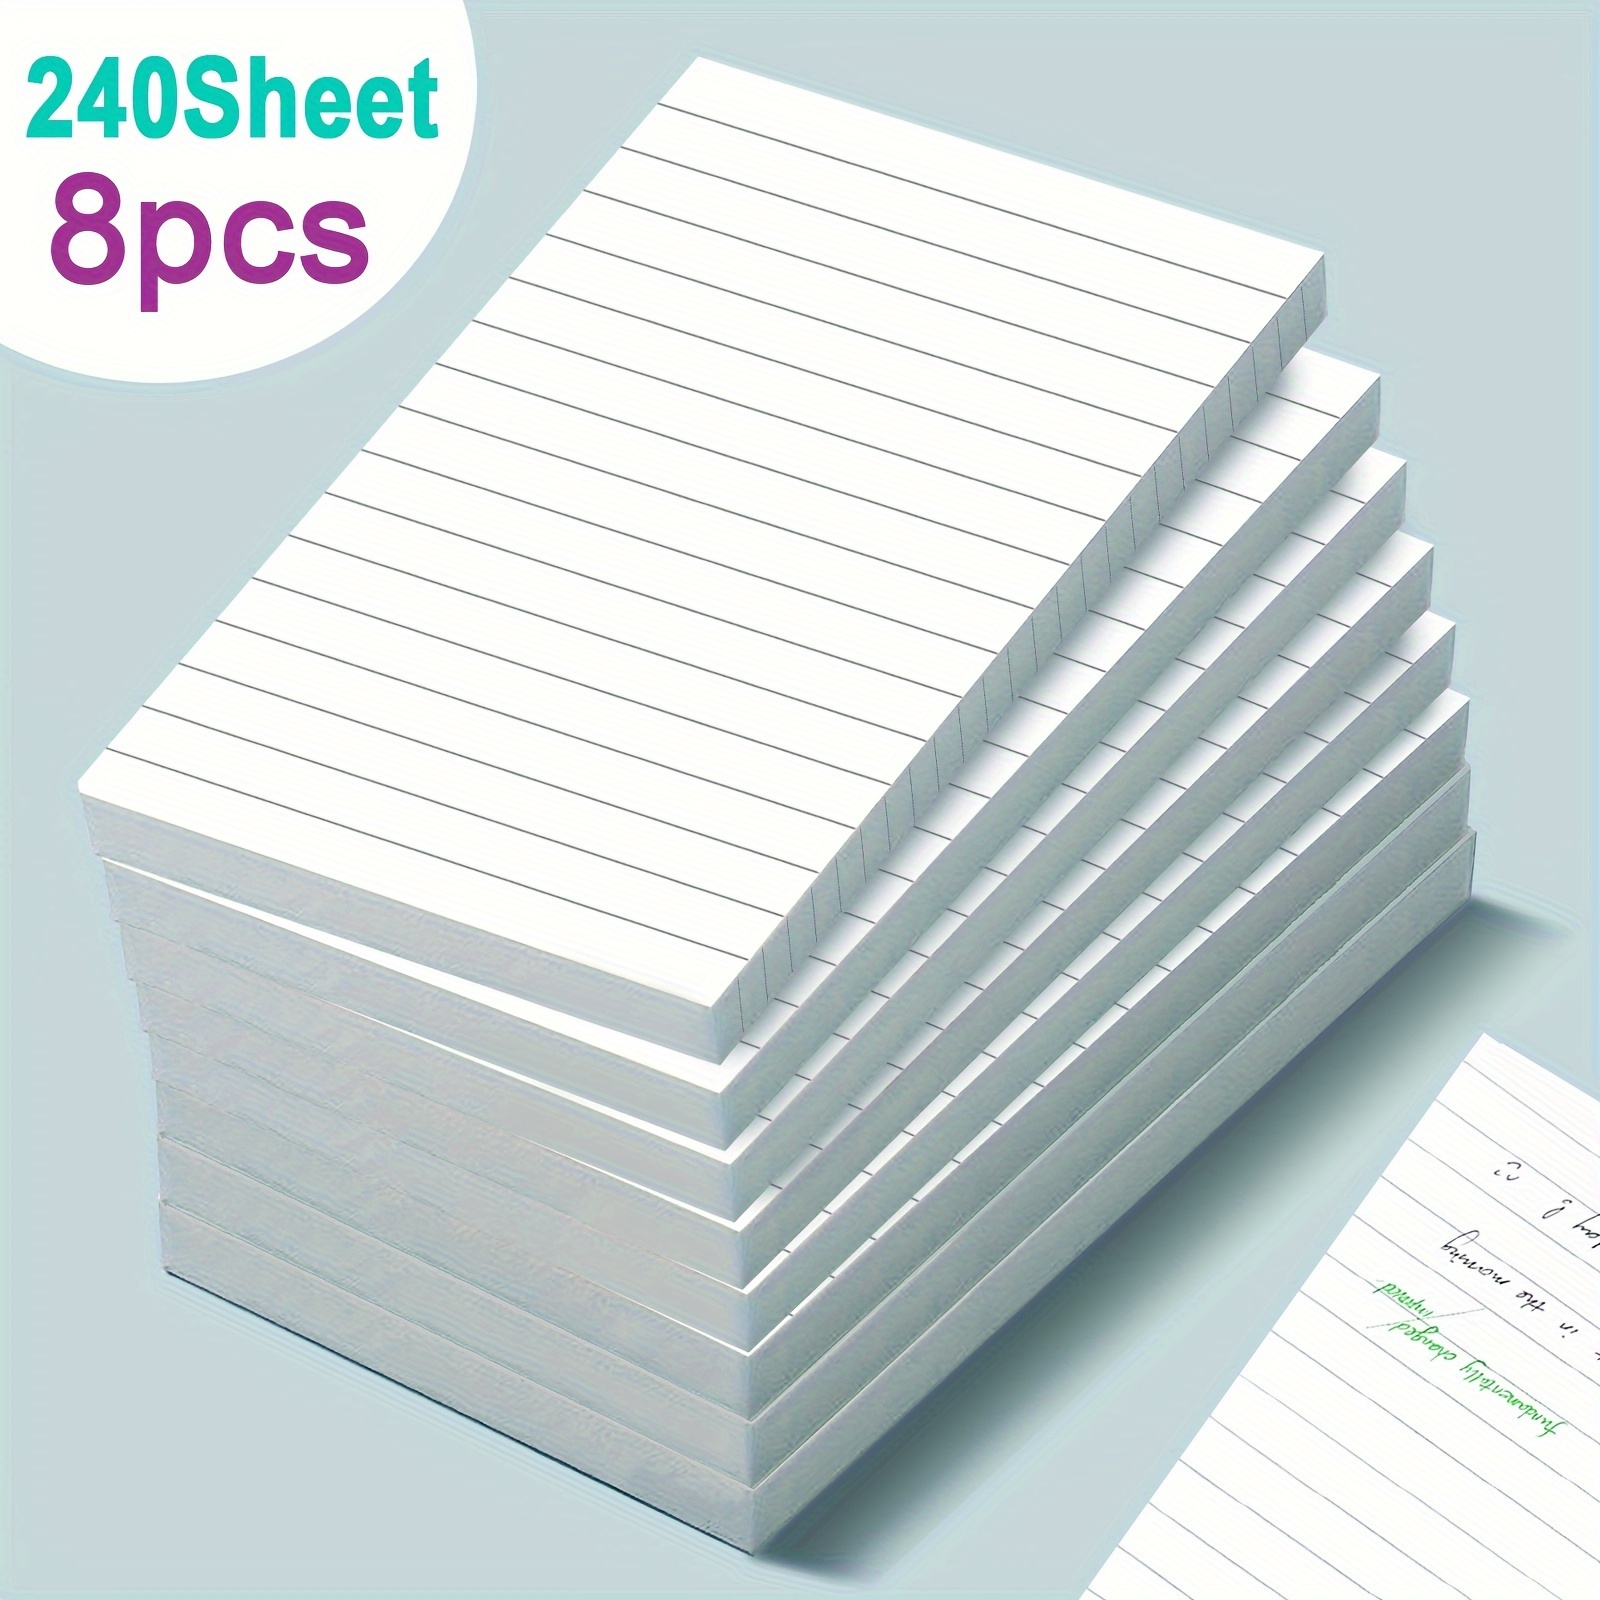 

8pcs/5pcs, Line And Grid Sticky Notes, Self-adhesive Memo Pads, Strong Adhesive Stickers, College-ruled White Paper, 30 Sheets Per Book, Easy To Post In Office, Home, And School Memo Pads